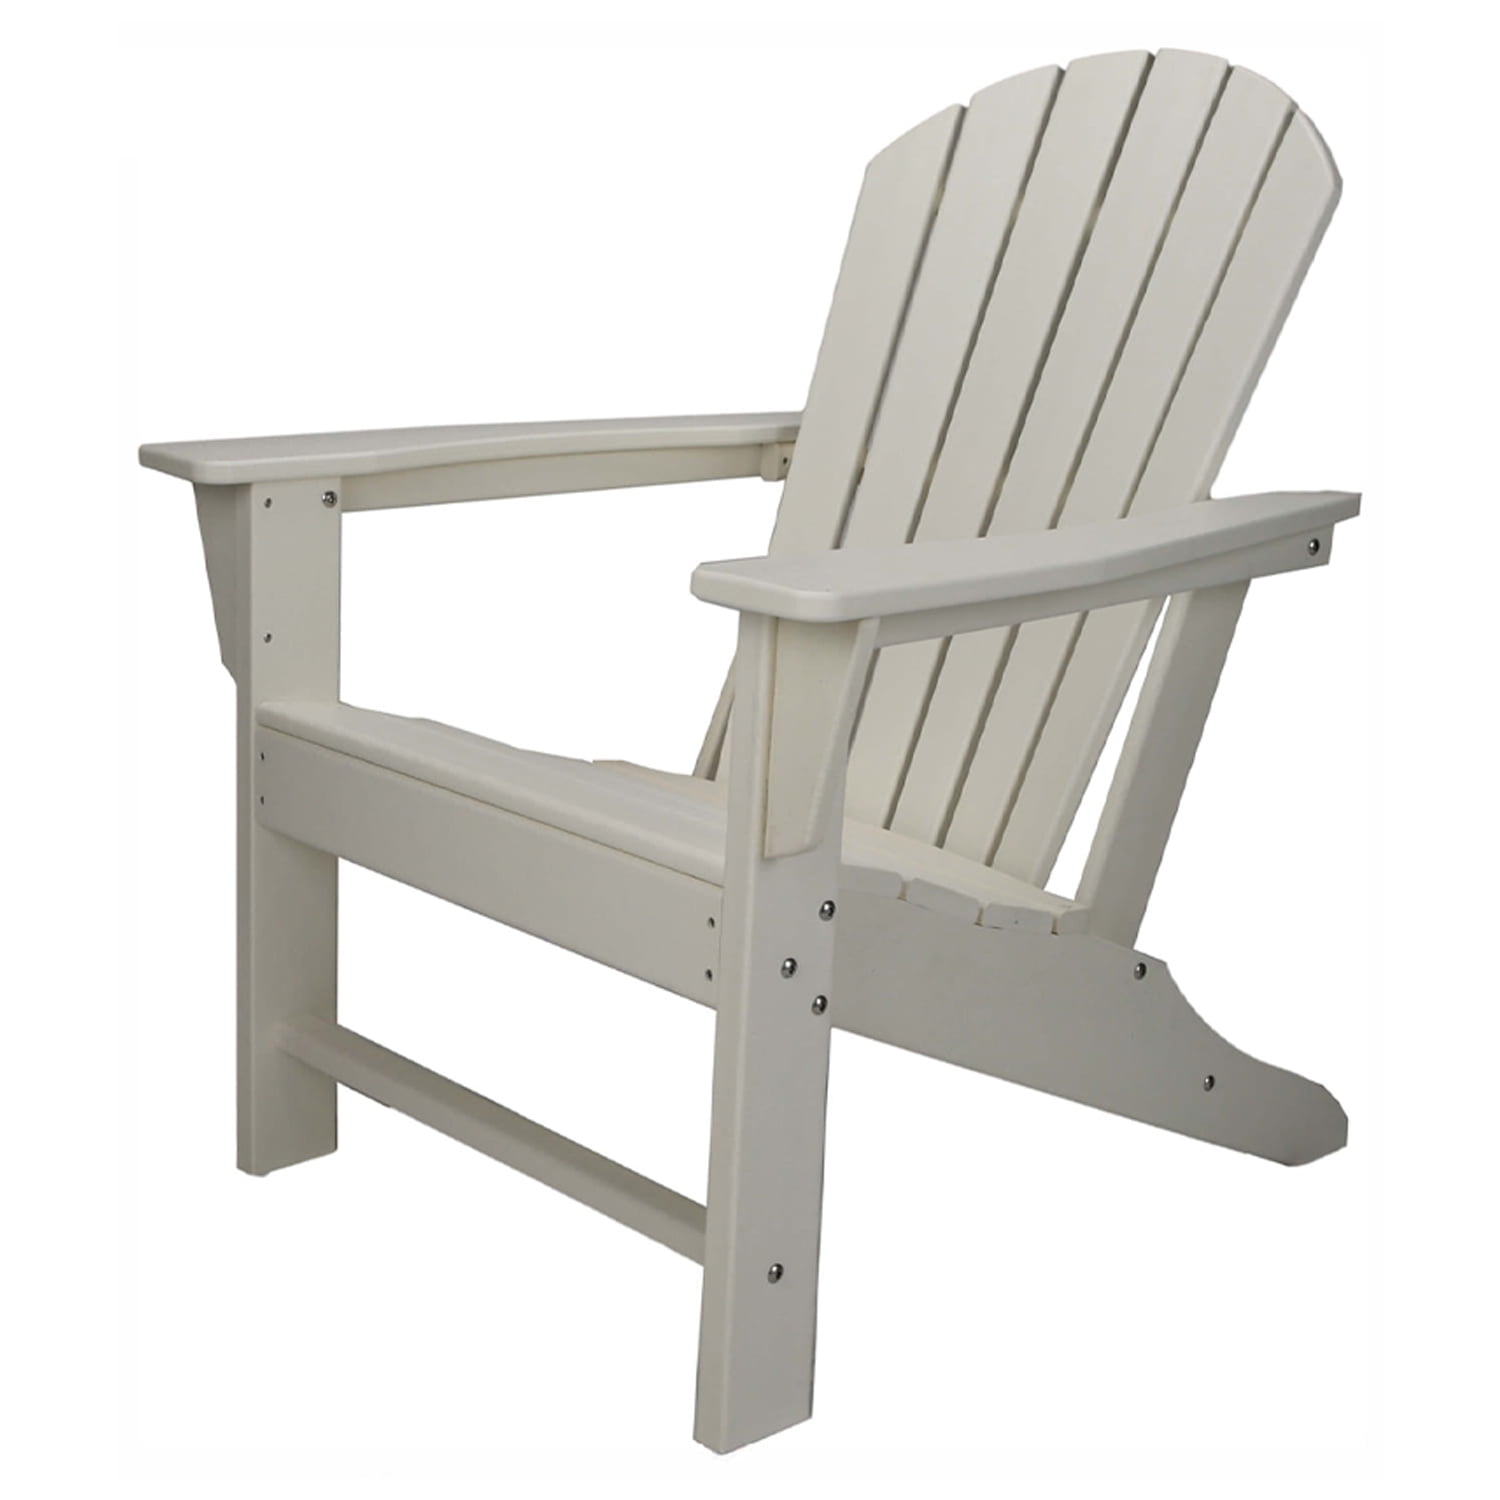 Details about   Patio Adirondack Chair Outdoor Poly Seat Lounge Garden Deck UV Protected USA 